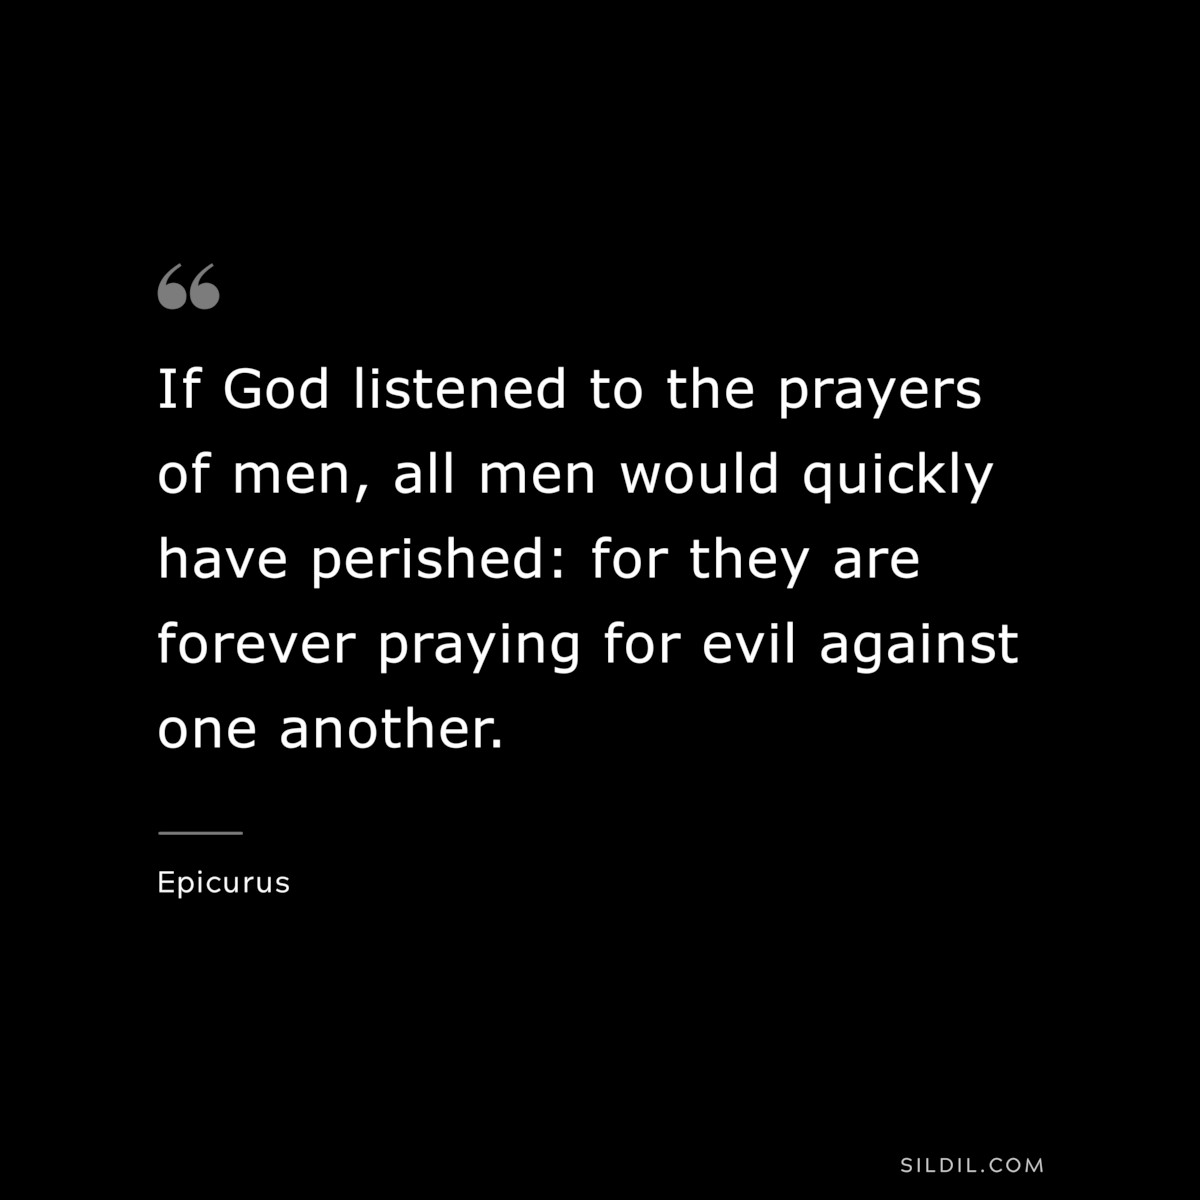 If God listened to the prayers of men, all men would quickly have perished: for they are forever praying for evil against one another. — Epicurus